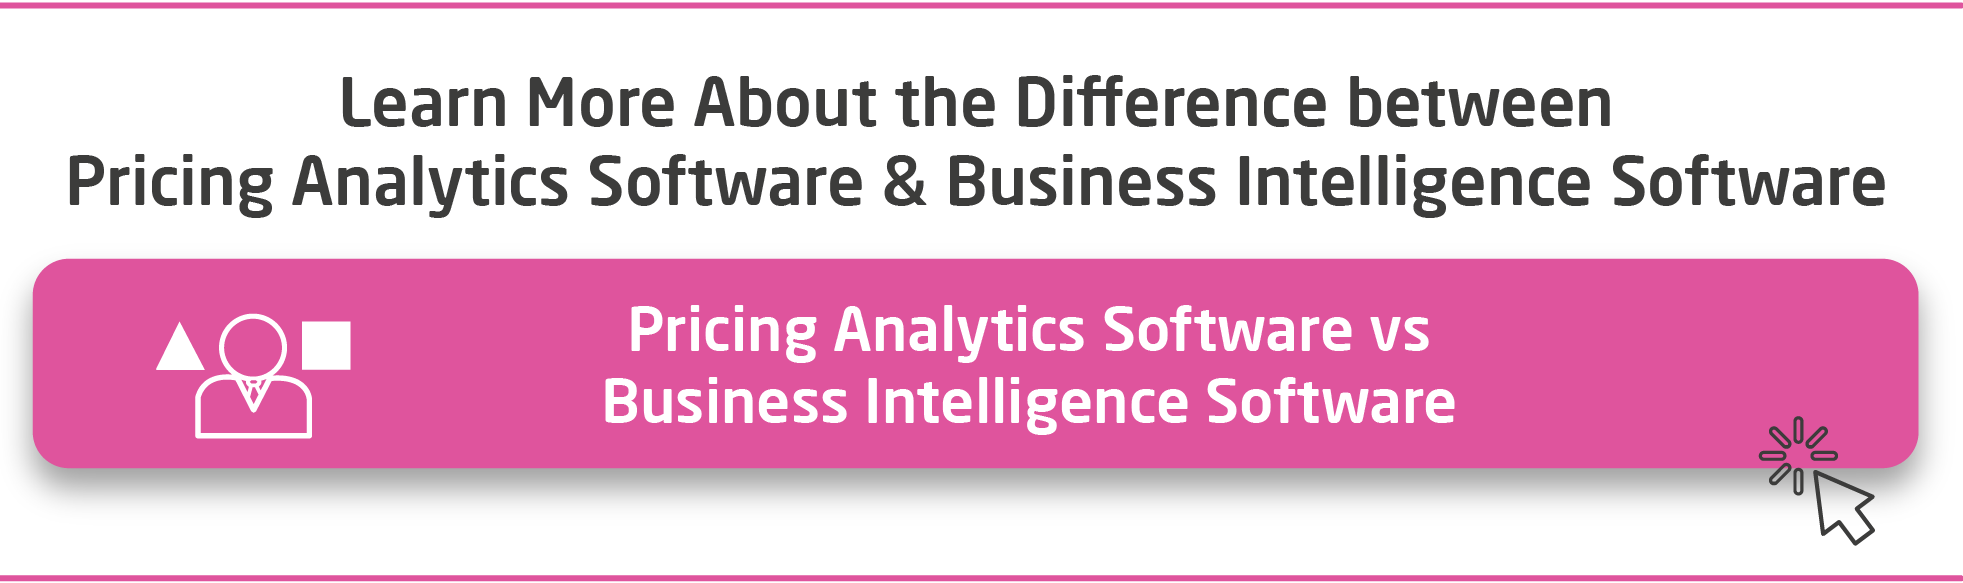 CTA-The-Difference-Between-Pricing-Analytics-Software-and-Business-Intelligence-Software